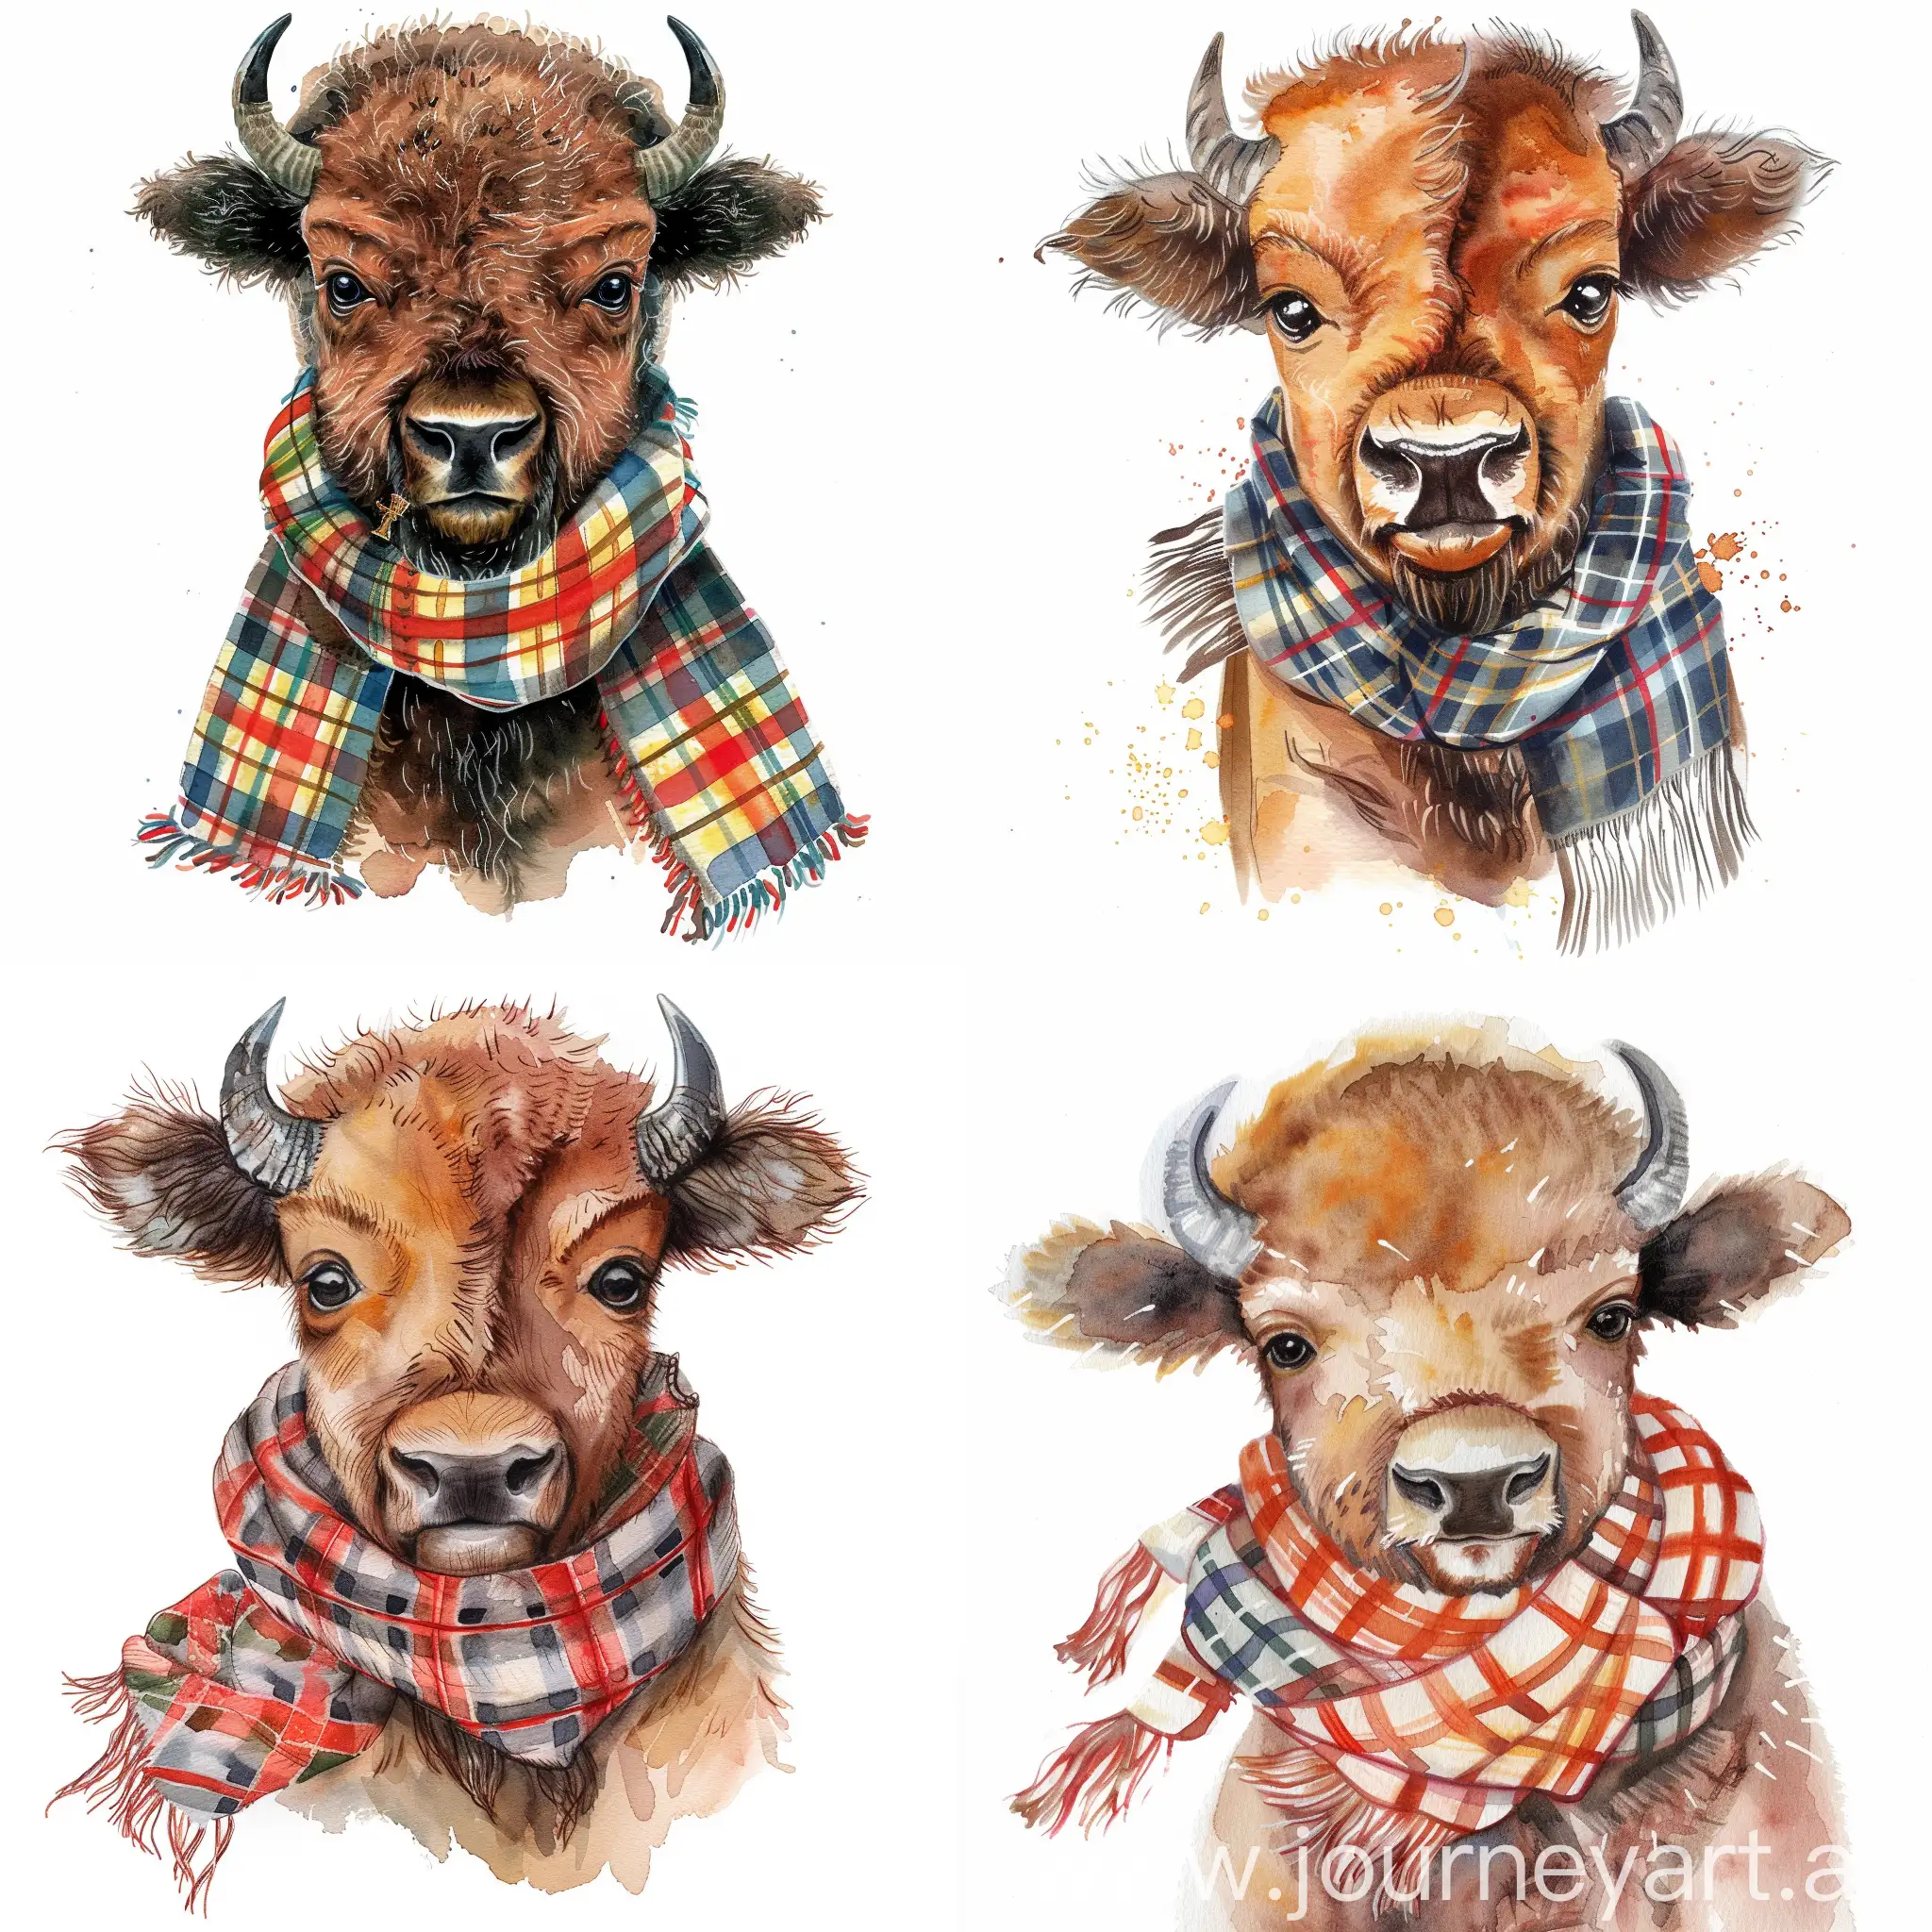 Adorable-Baby-Bison-Portrait-with-Scotland-Pattern-Scarf-in-Watercolor-Style